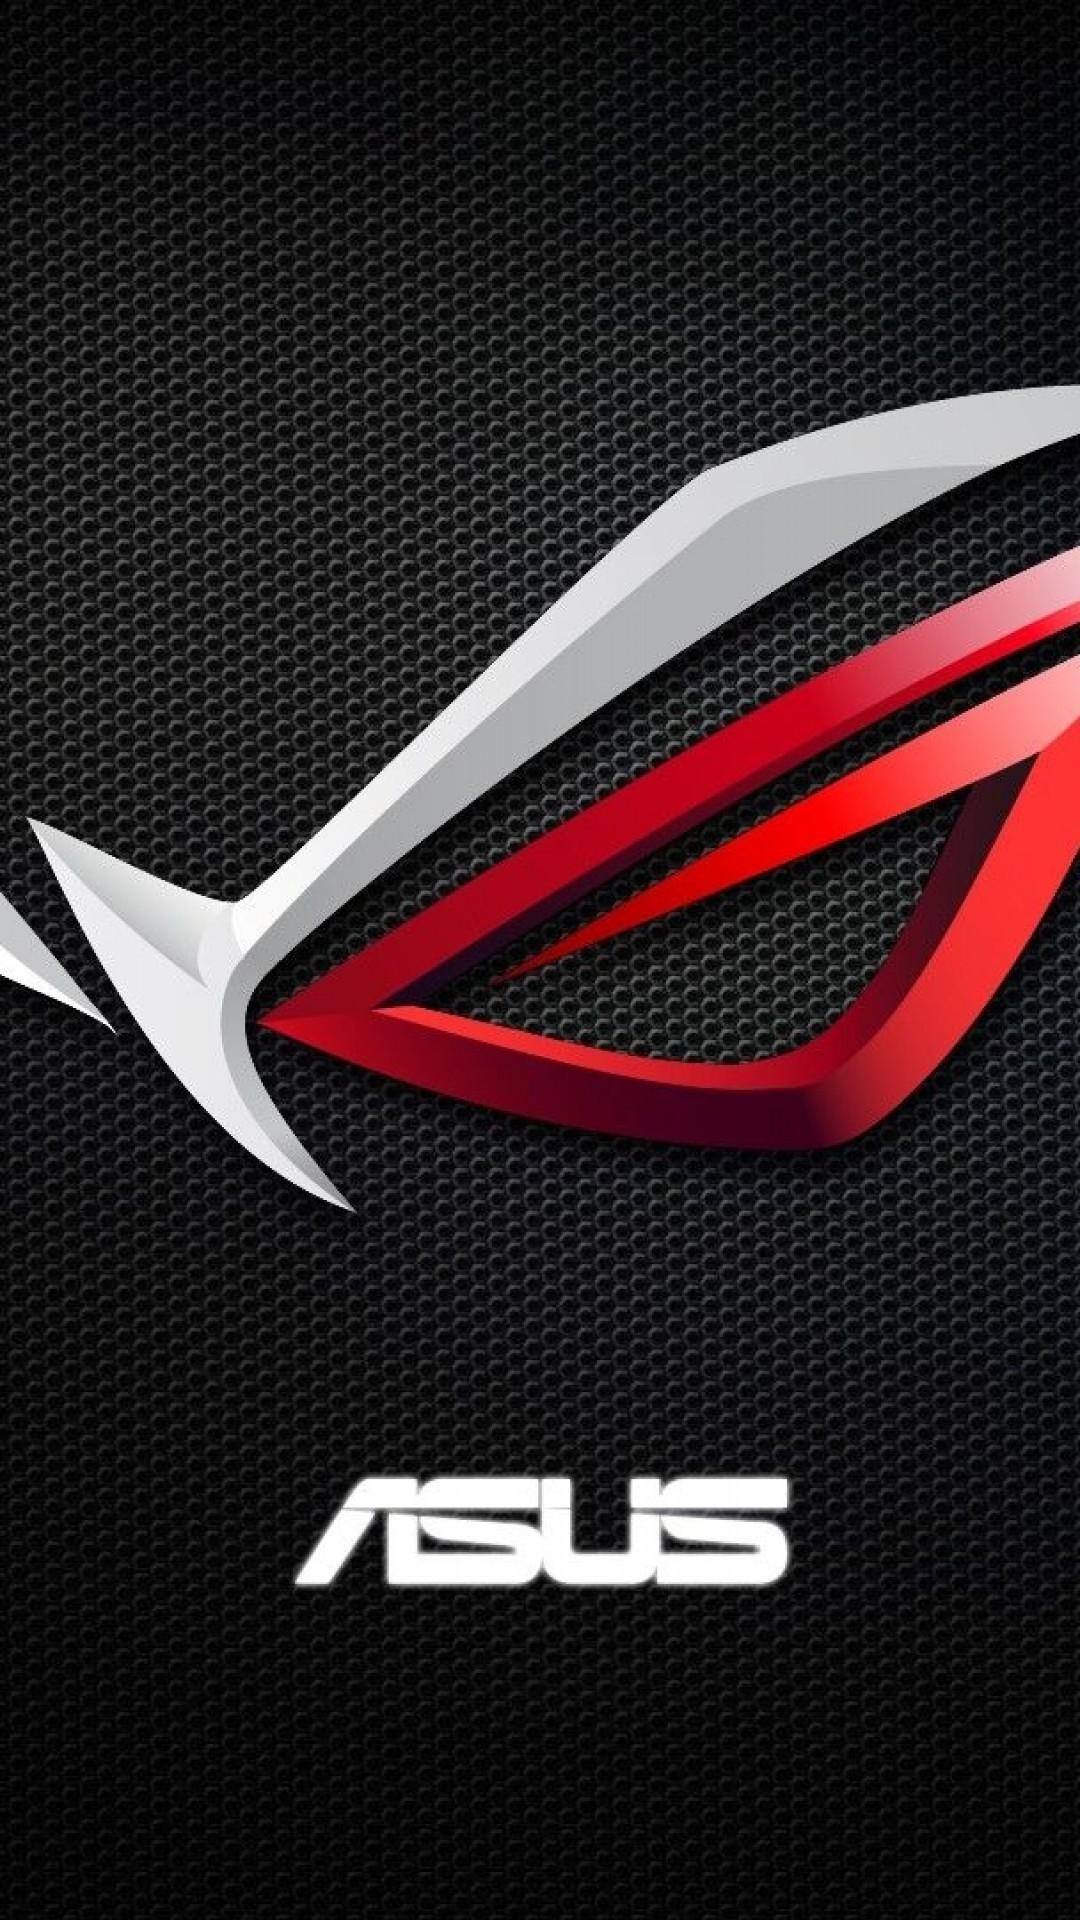 Download 1080x1920 Asus, Republic Of Gamers, Logo, Rog Wallpaper for iPhone iPhone 7 Plus, iPhone 6+, Sony Xperia Z, HTC One